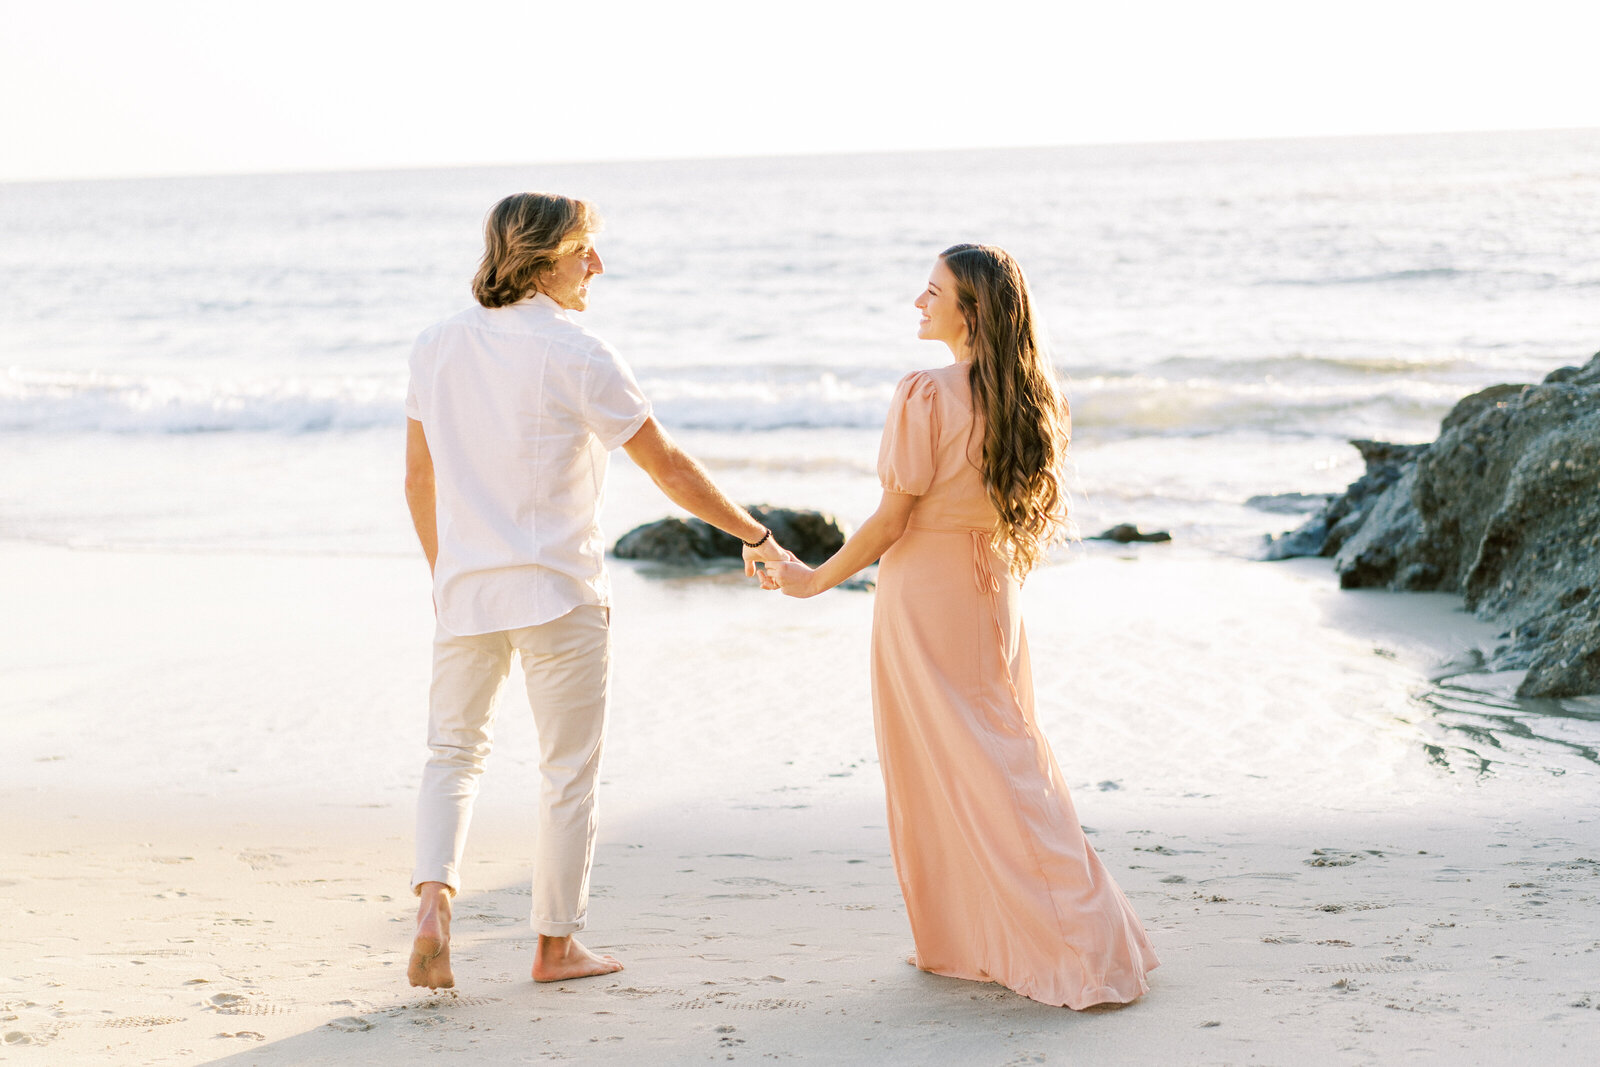 Portrait of a man in a white shirt and khakis holding the hand of a woman in a pink dress on the sand at the beach.